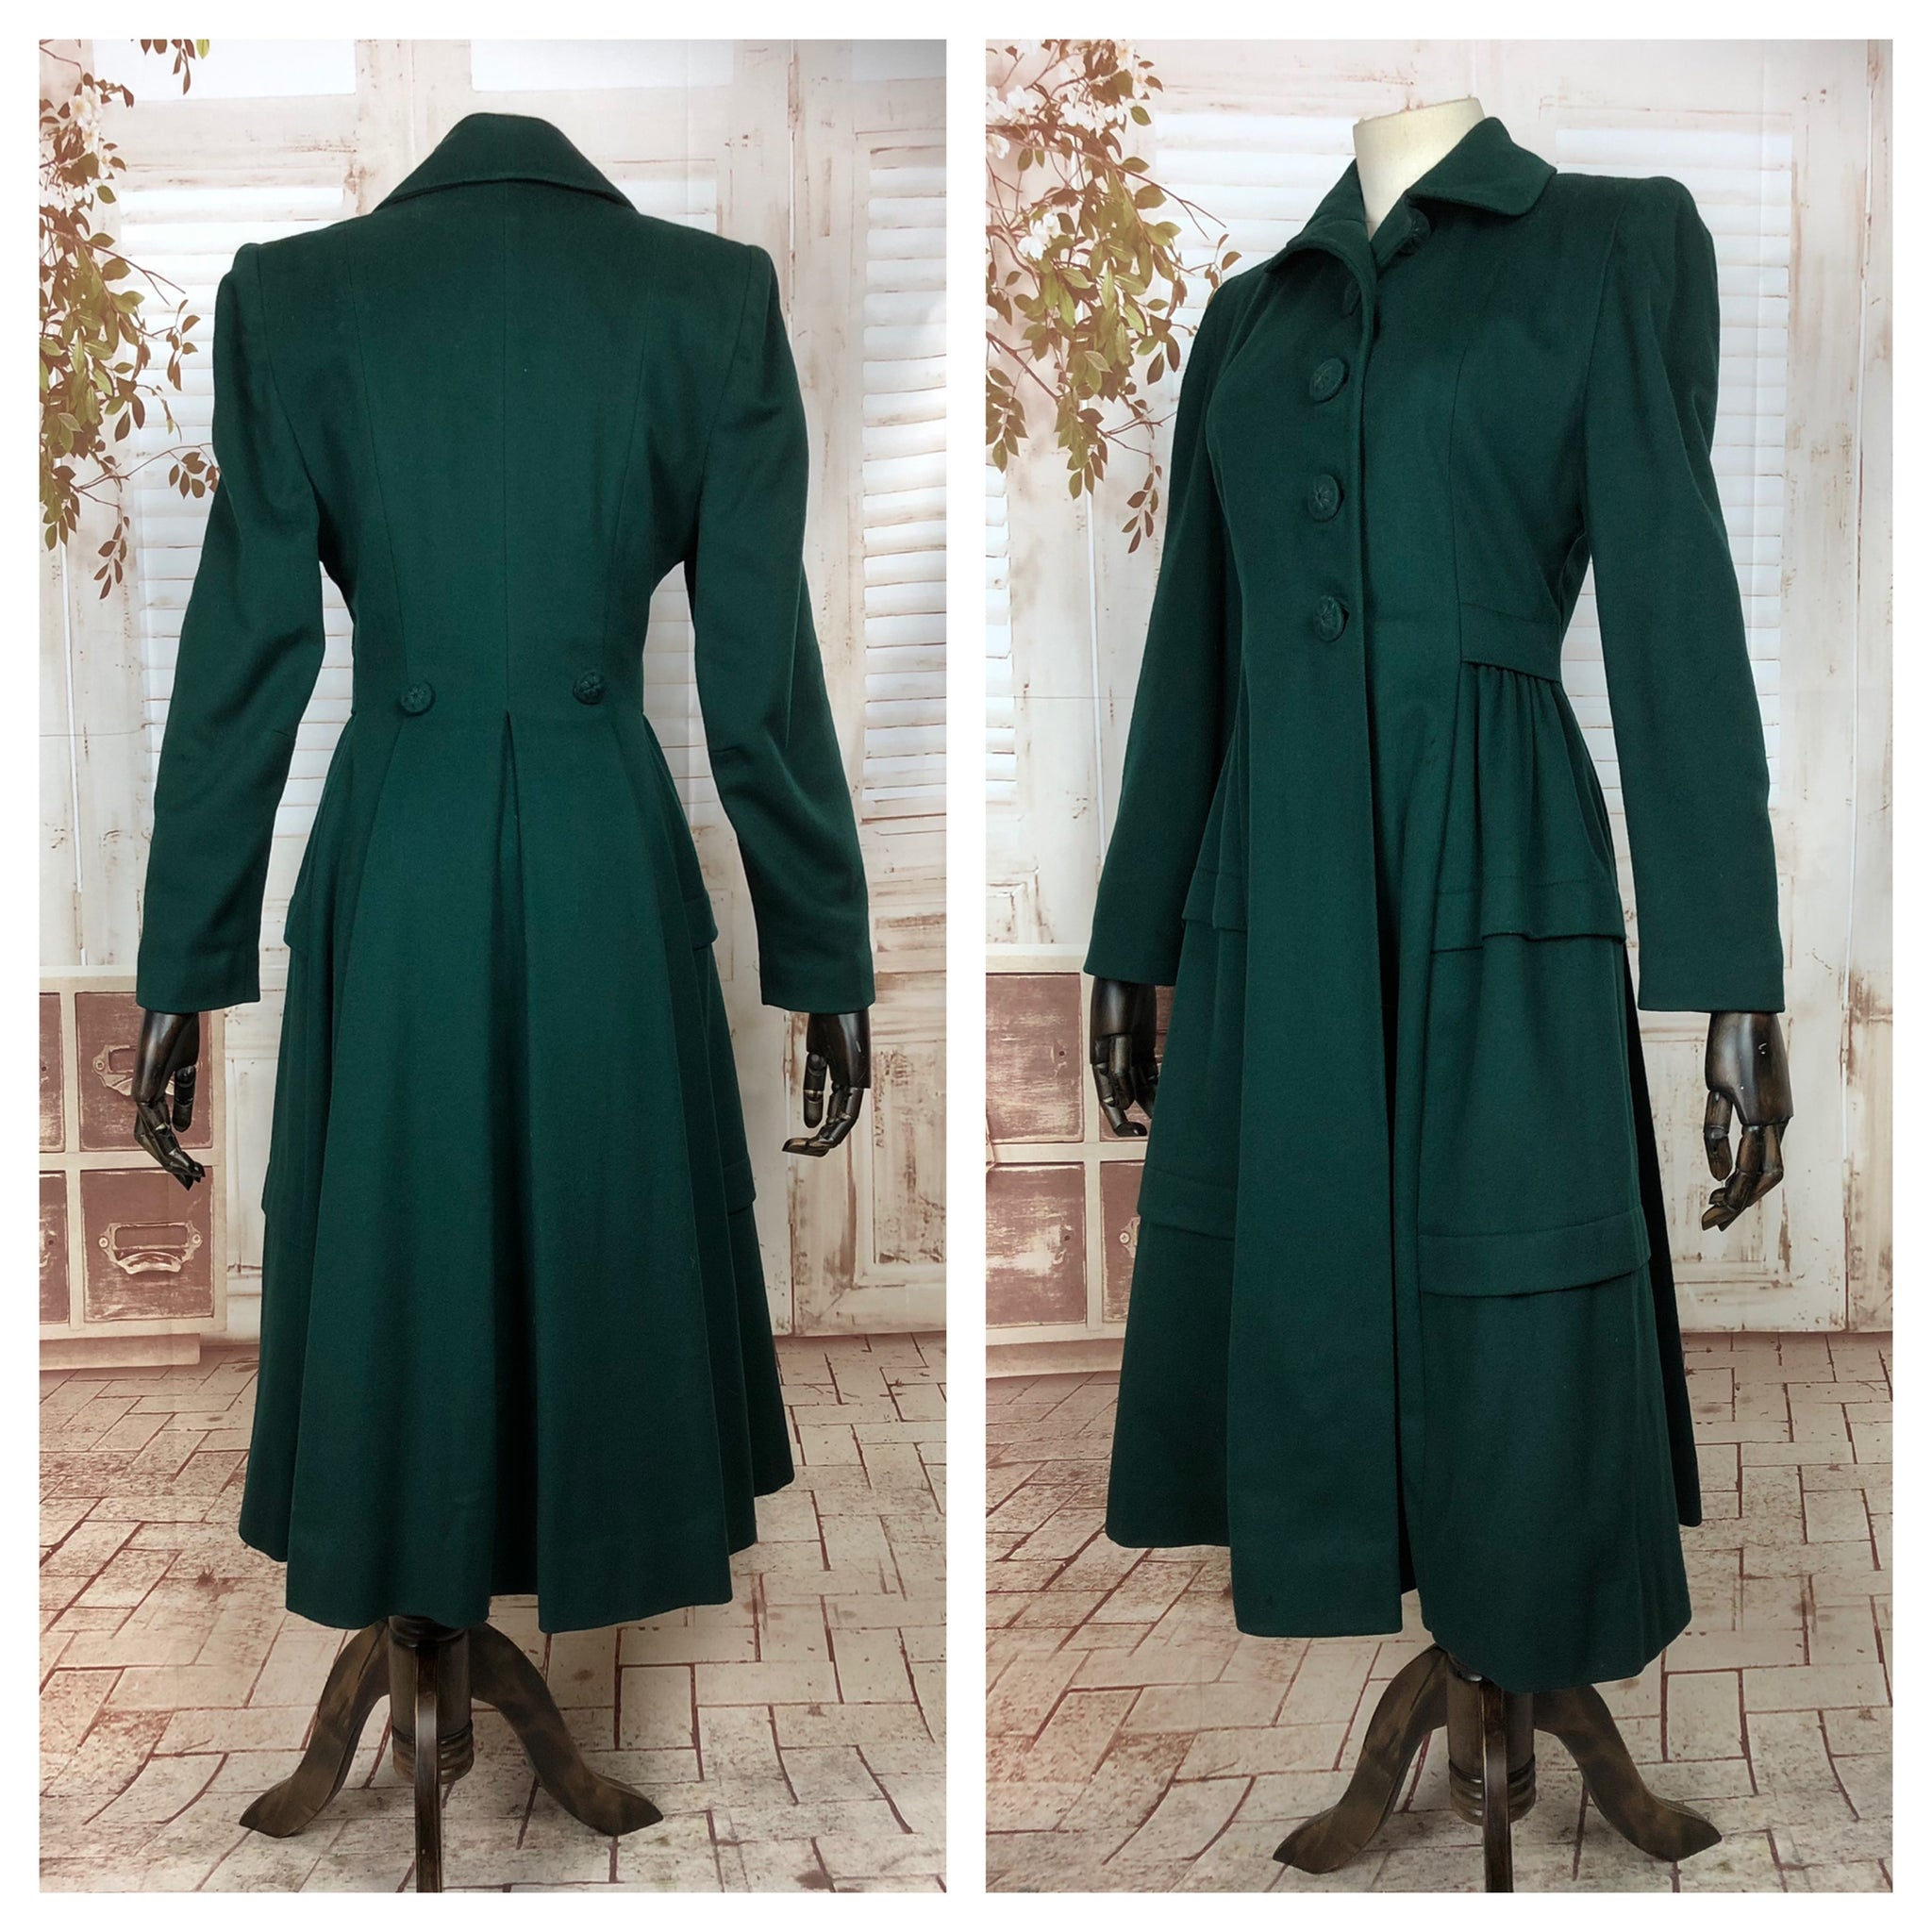 Incredible Original Vintage 1940s 40s Emerald Green Fit And Flare Princess Coat With Tiered Skirt